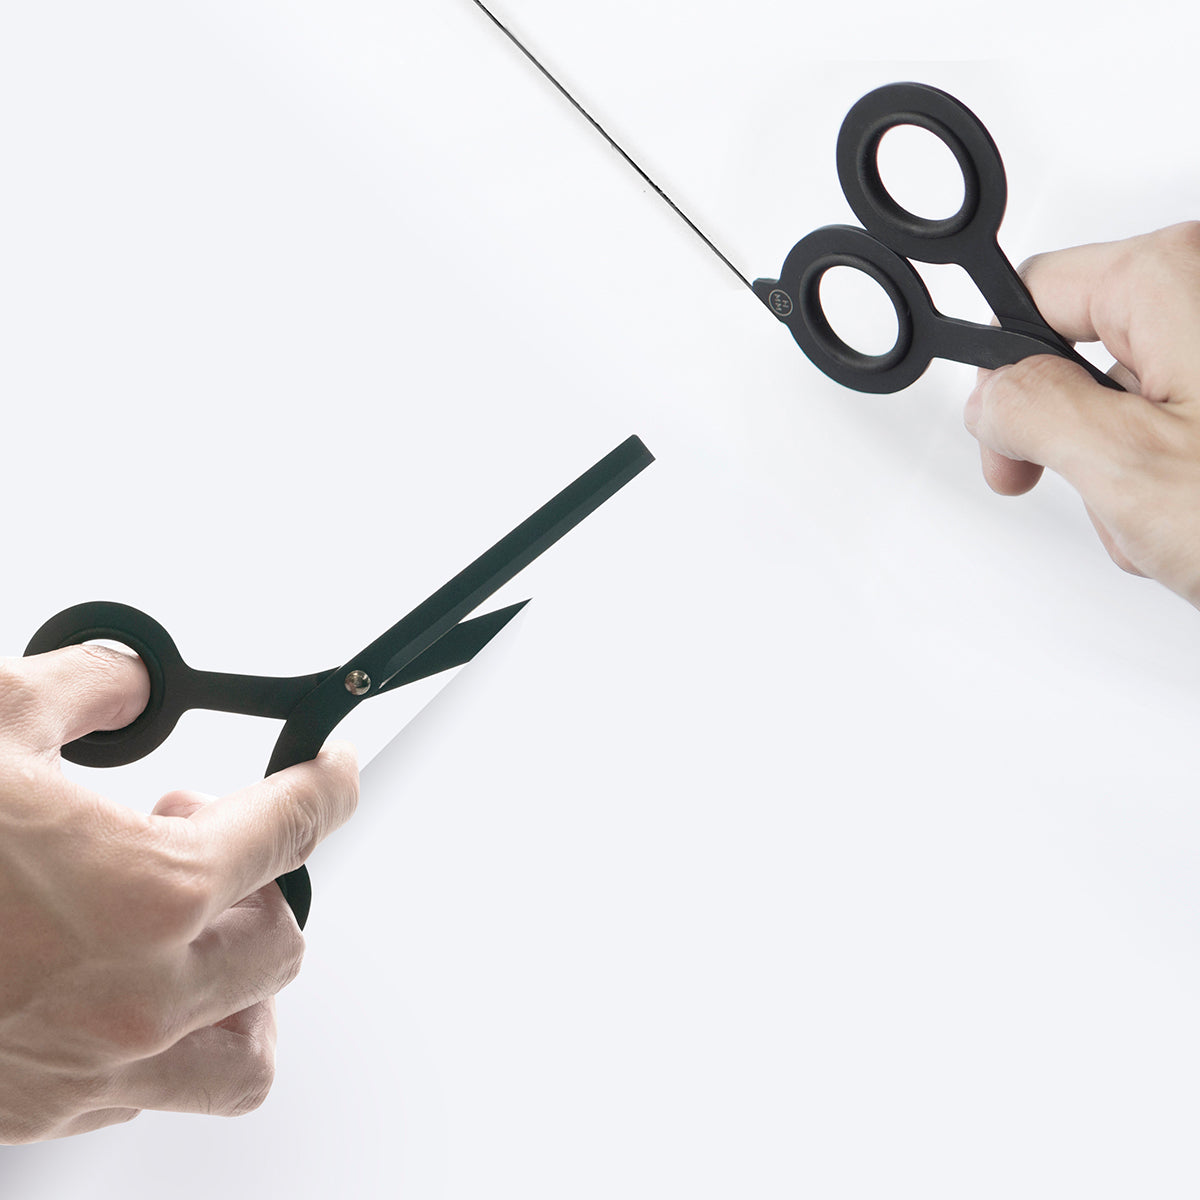 HMM Scissors: Safety Scissors for Adults, We are launching the HMM  Scissors worldwide very soon. Before then, check out this video for our  crowdfunding project in Taiwan:, By HMM